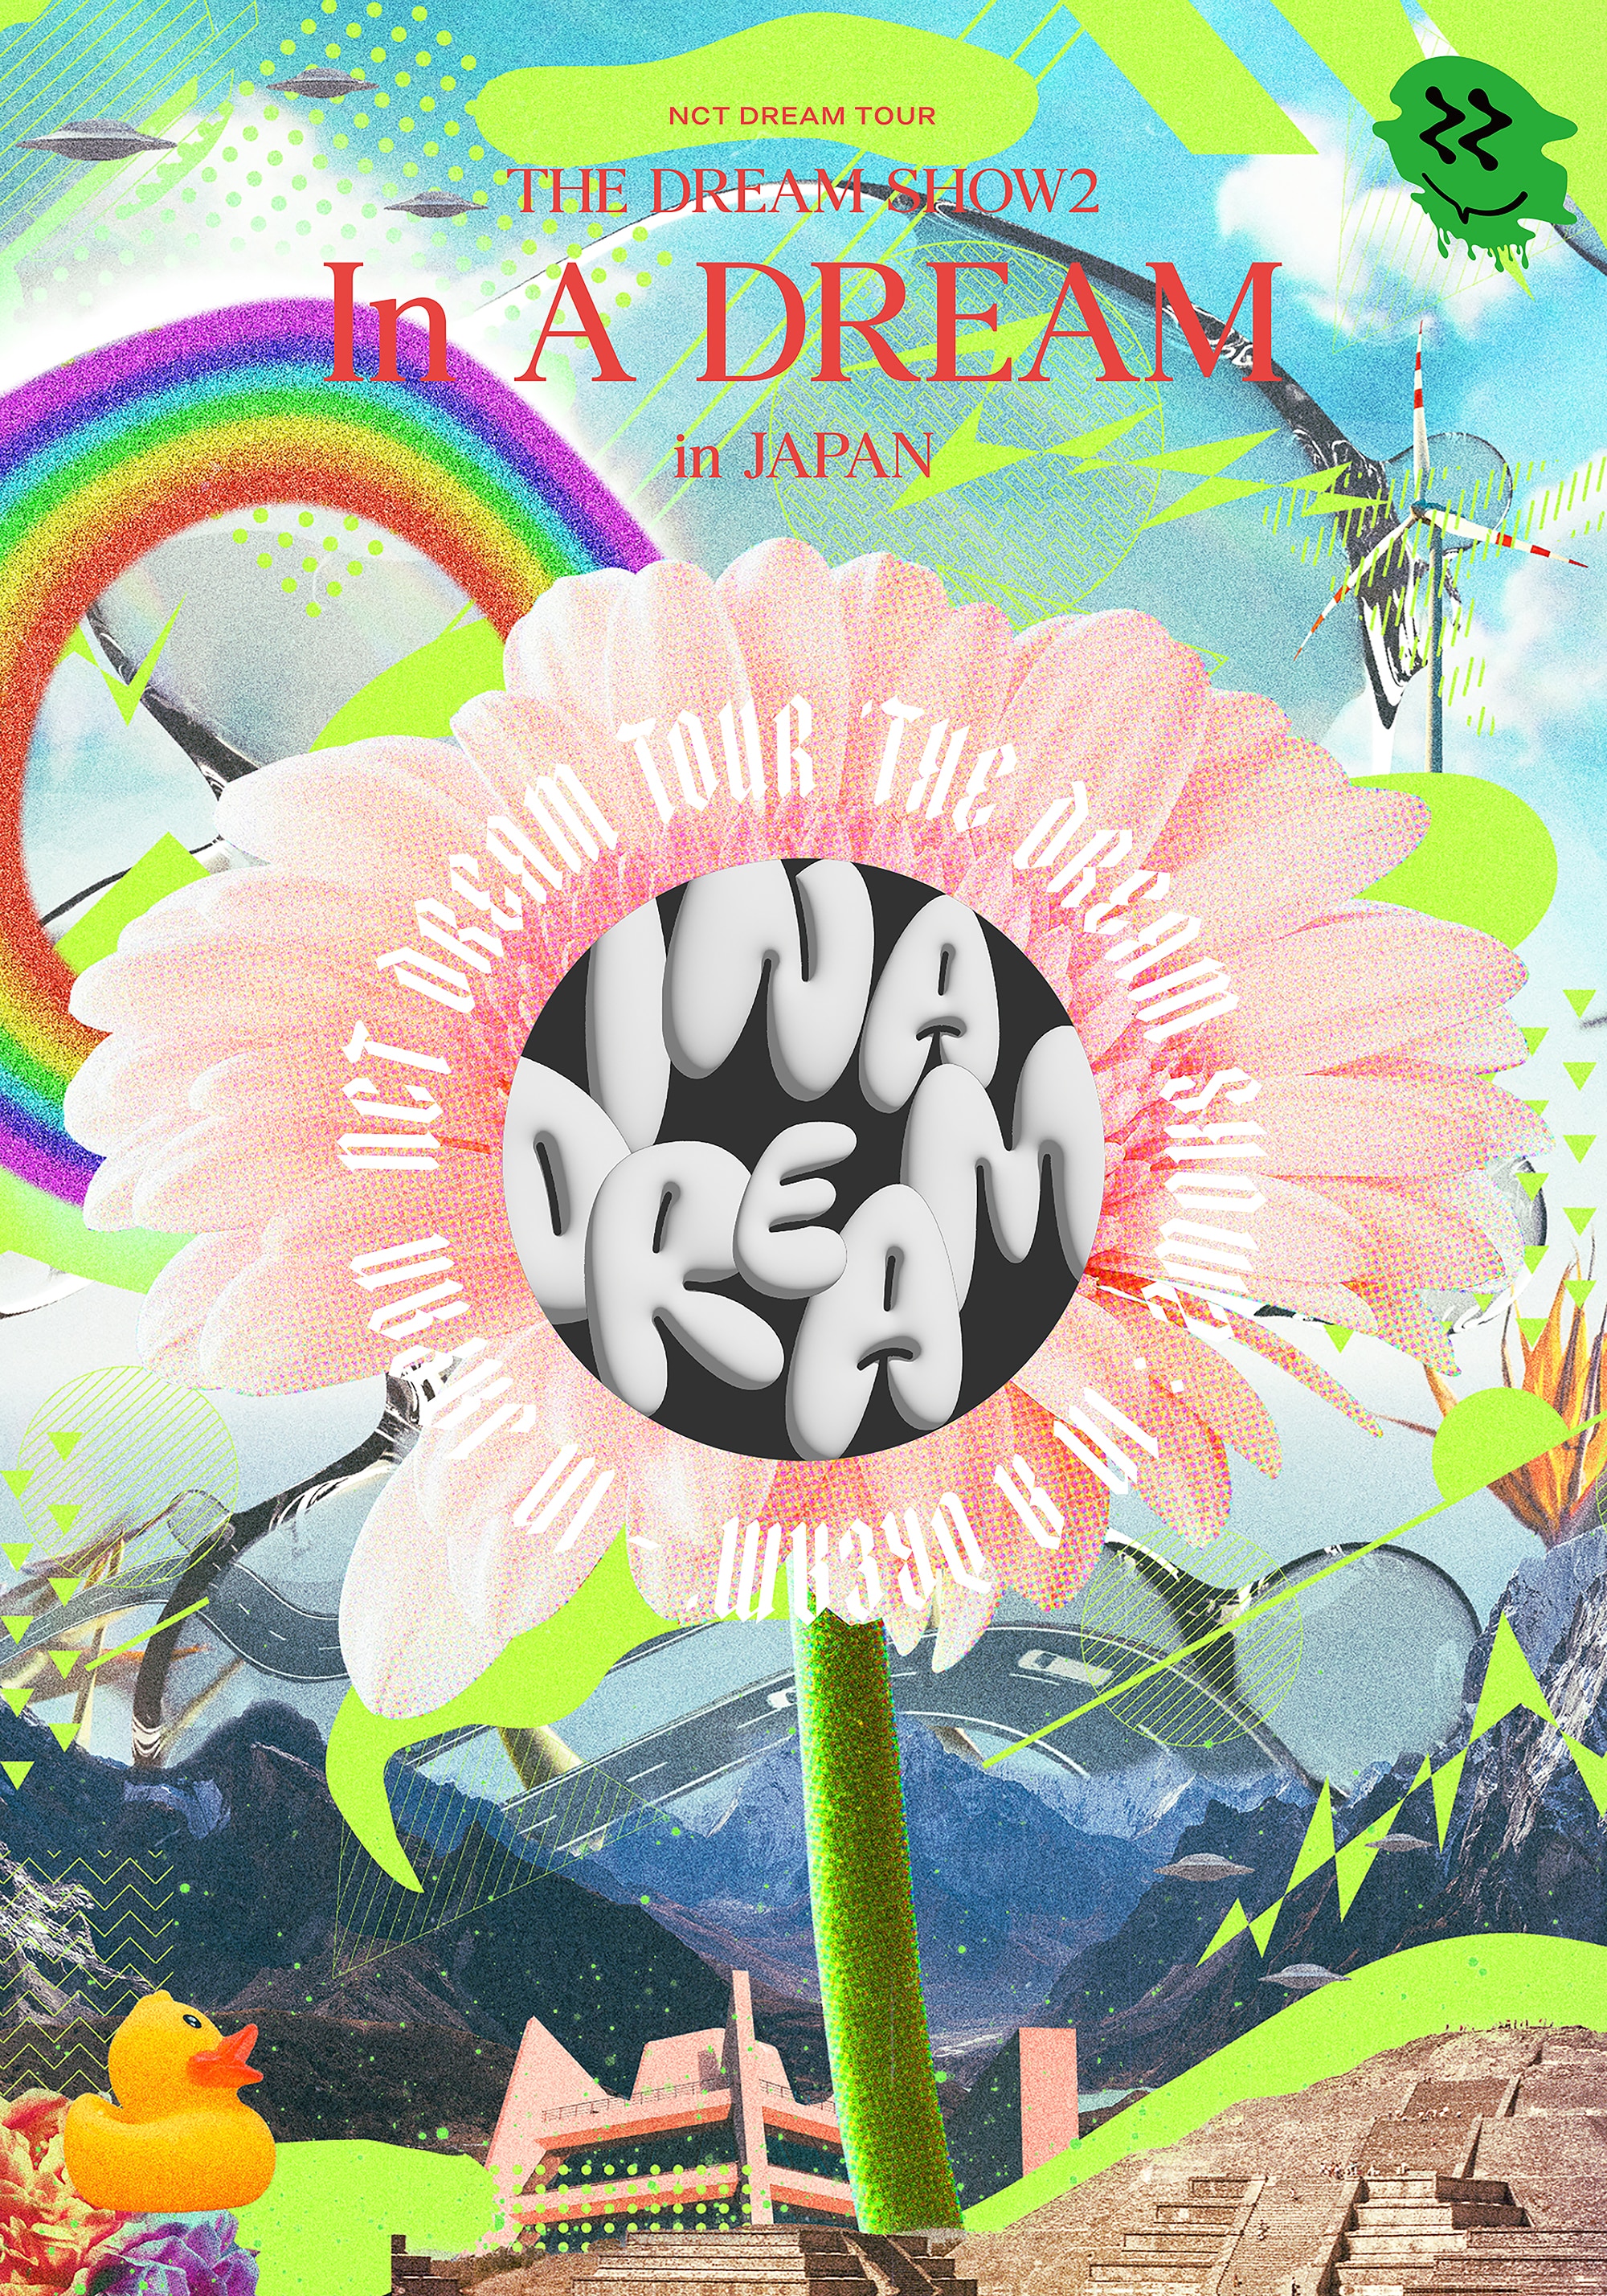 LIVE Blu-ray NCT DREAM『NCT DREAM TOUR 'THE DREAM SHOW2 : In A DREAM' - in JAPAN』